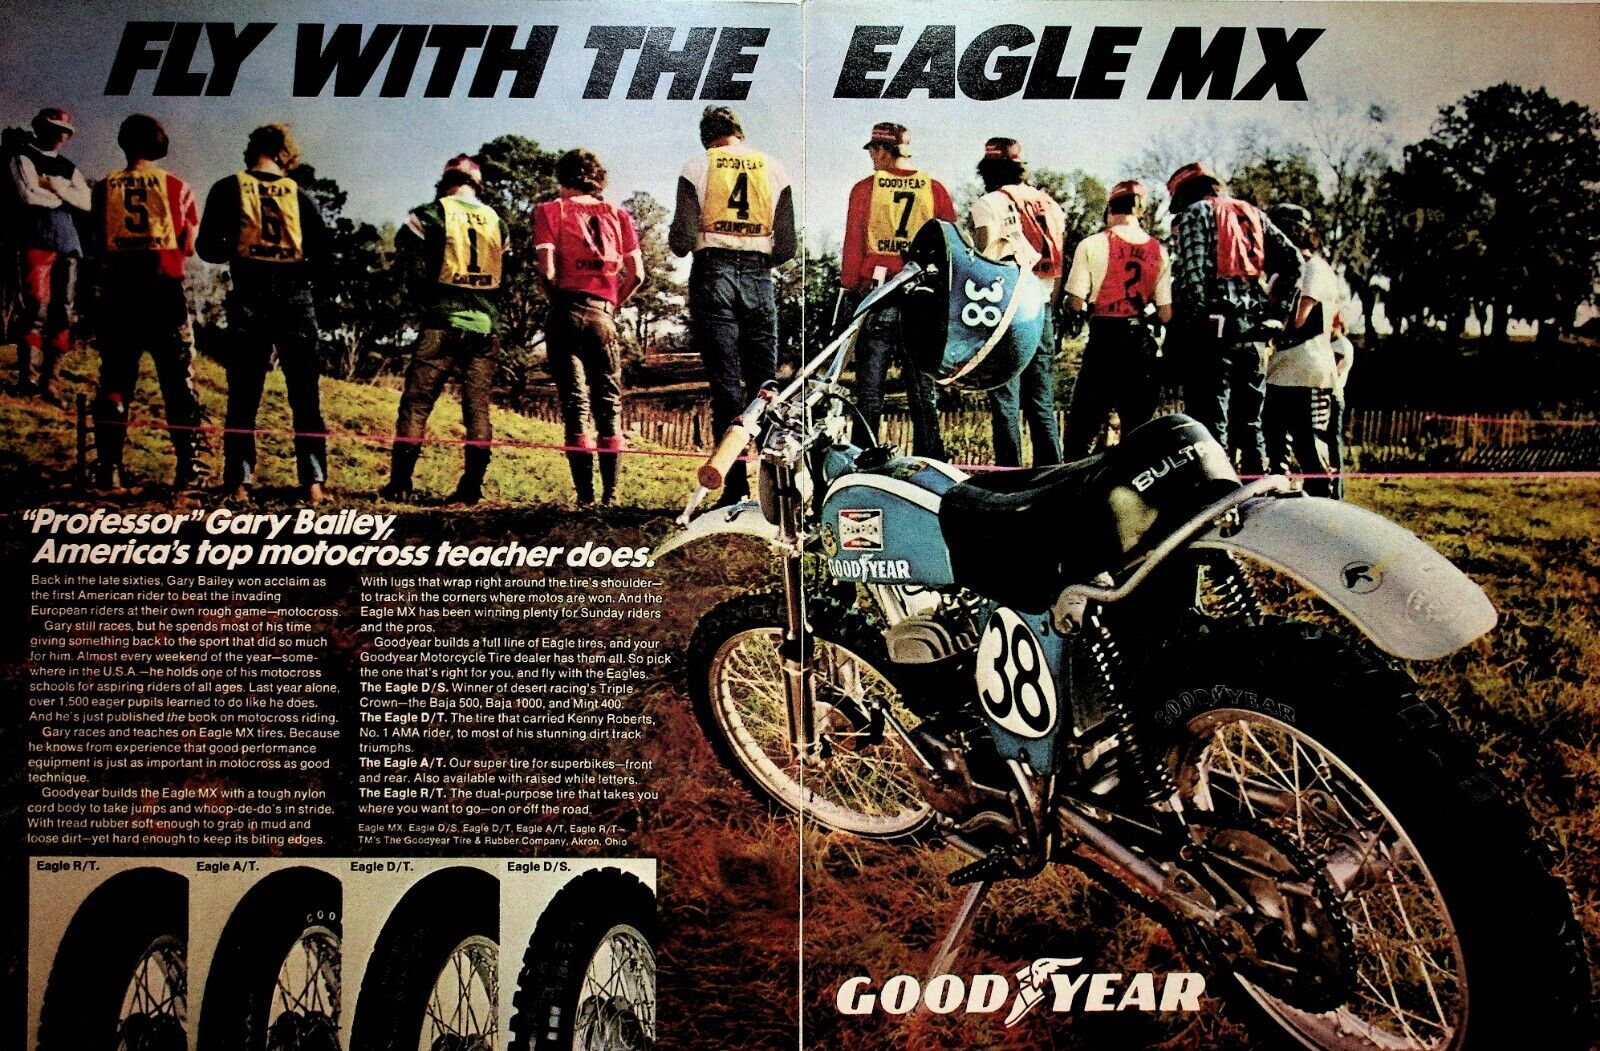 1974 Gary Bailey Motocross School Goodyear Tires - 2-Page Vintage Motorcycle Ad